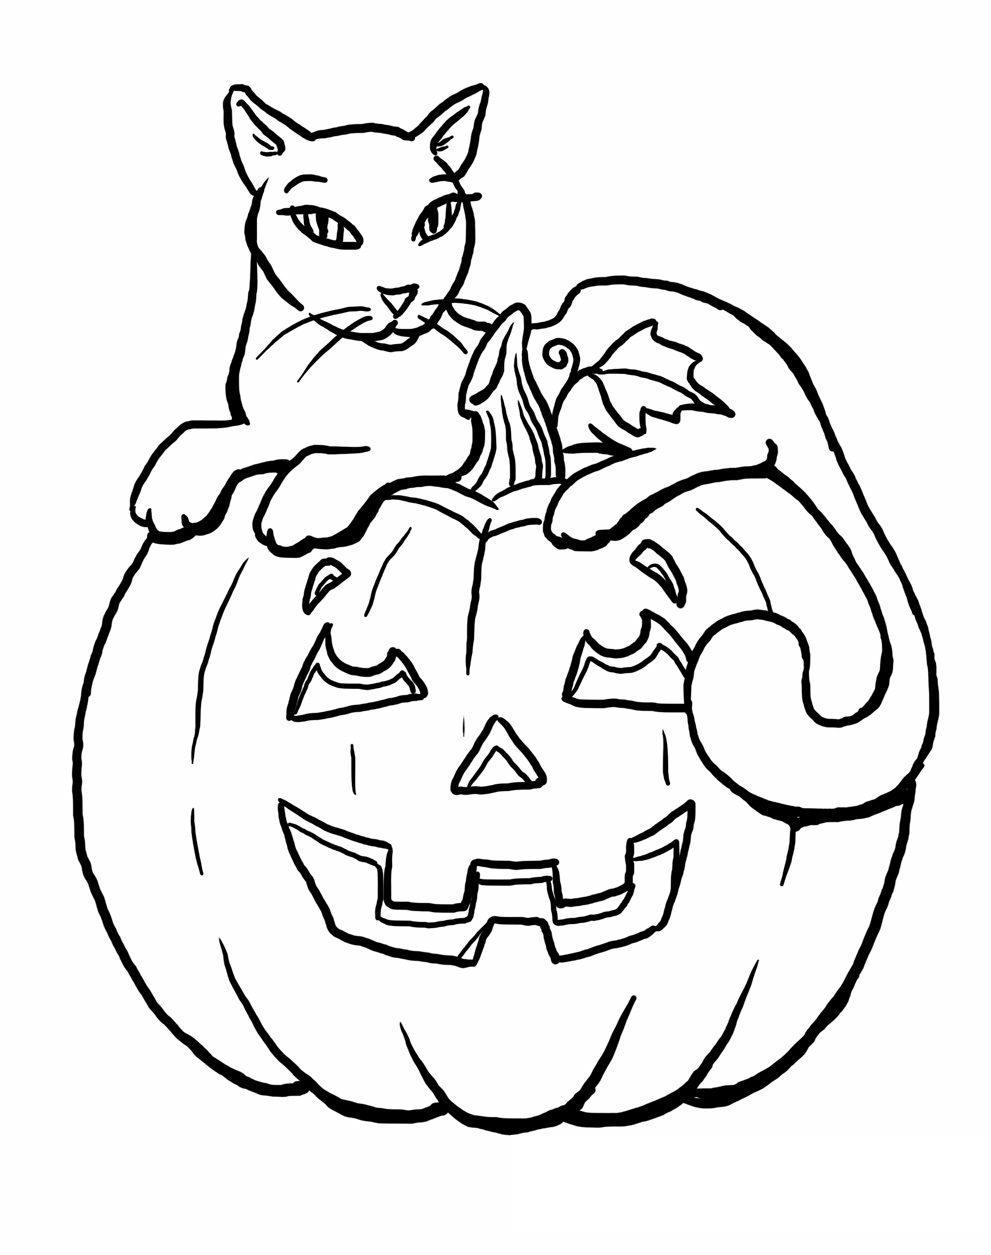 Spooky Cat Coloring Pages at GetColorings.com | Free ...